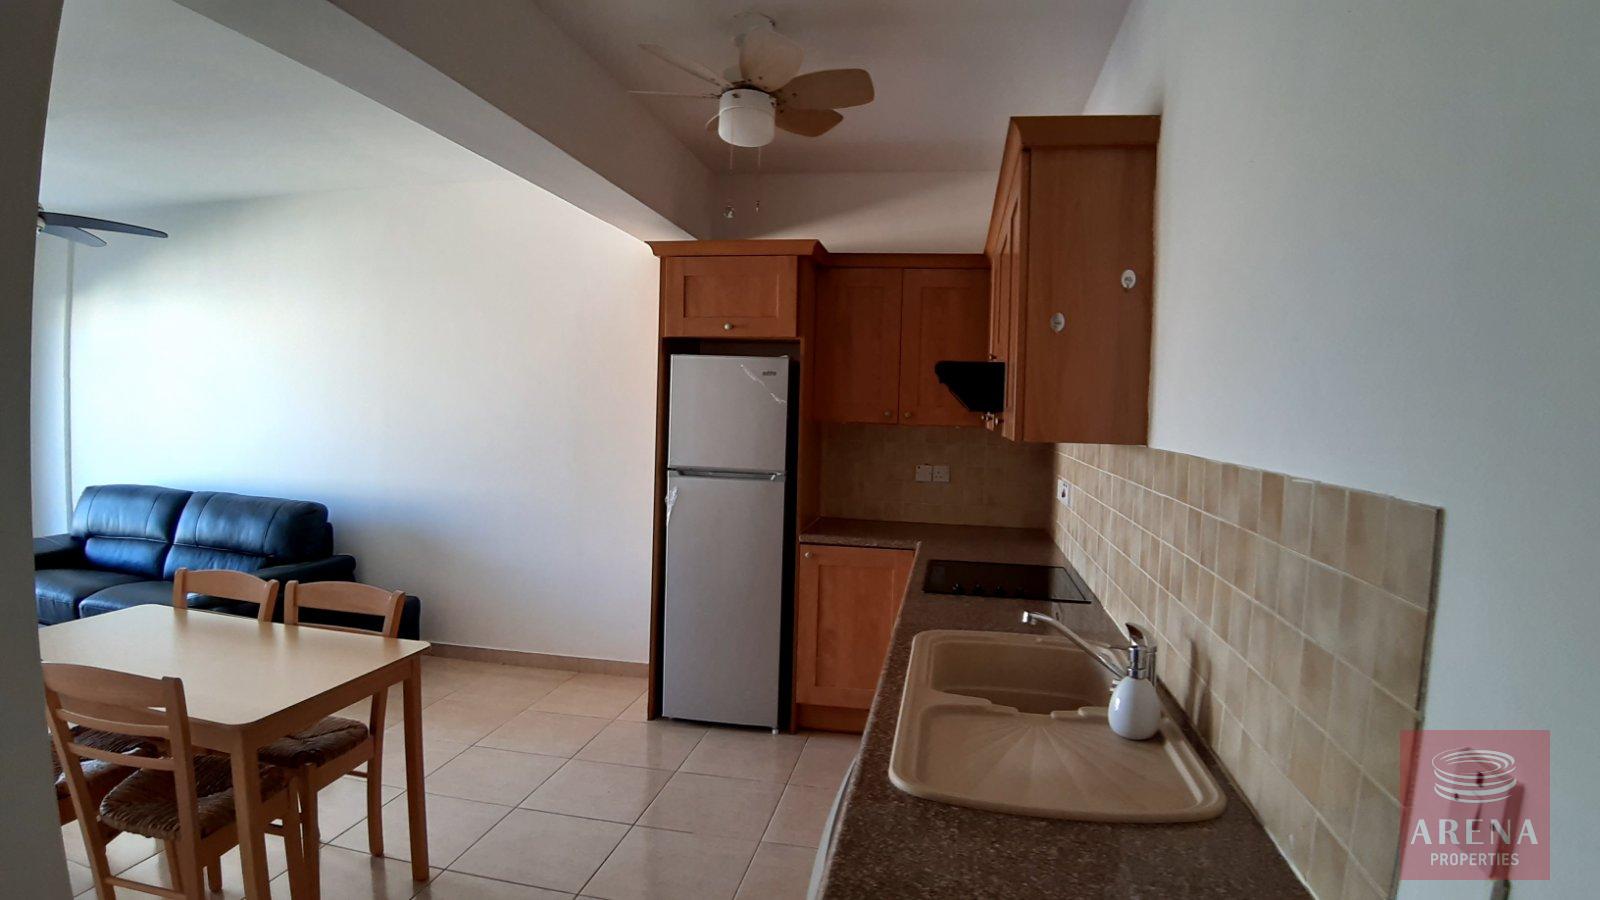 2 Bed Apt for rent in Paralimni - kitchen